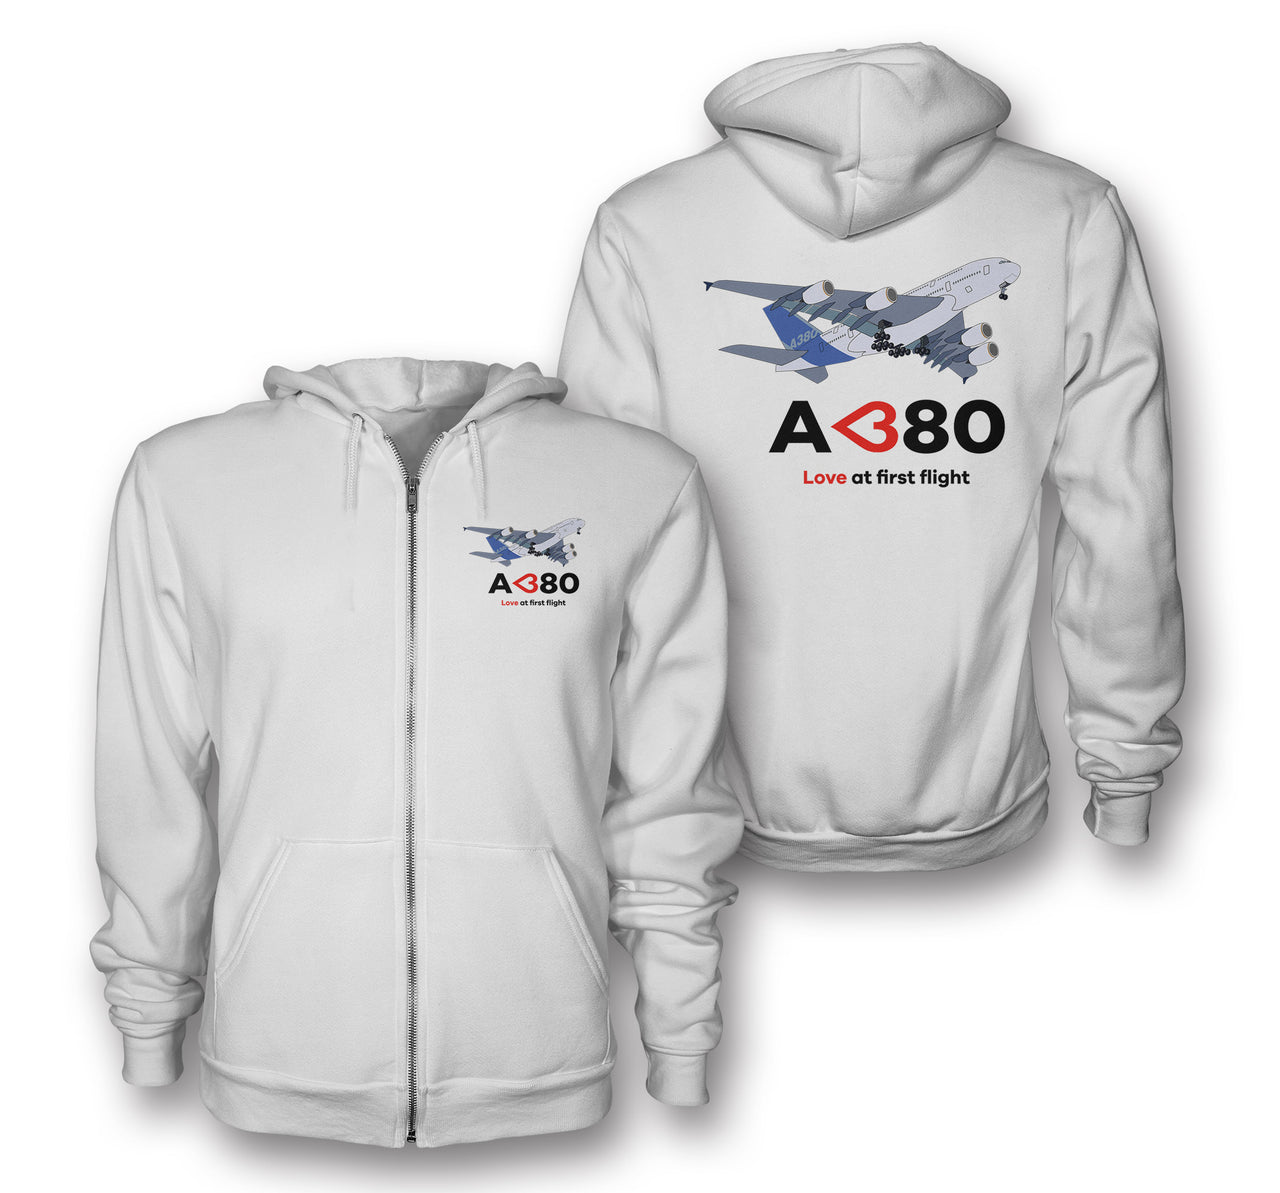 Airbus A380 Love at first flight Designed Zipped Hoodies